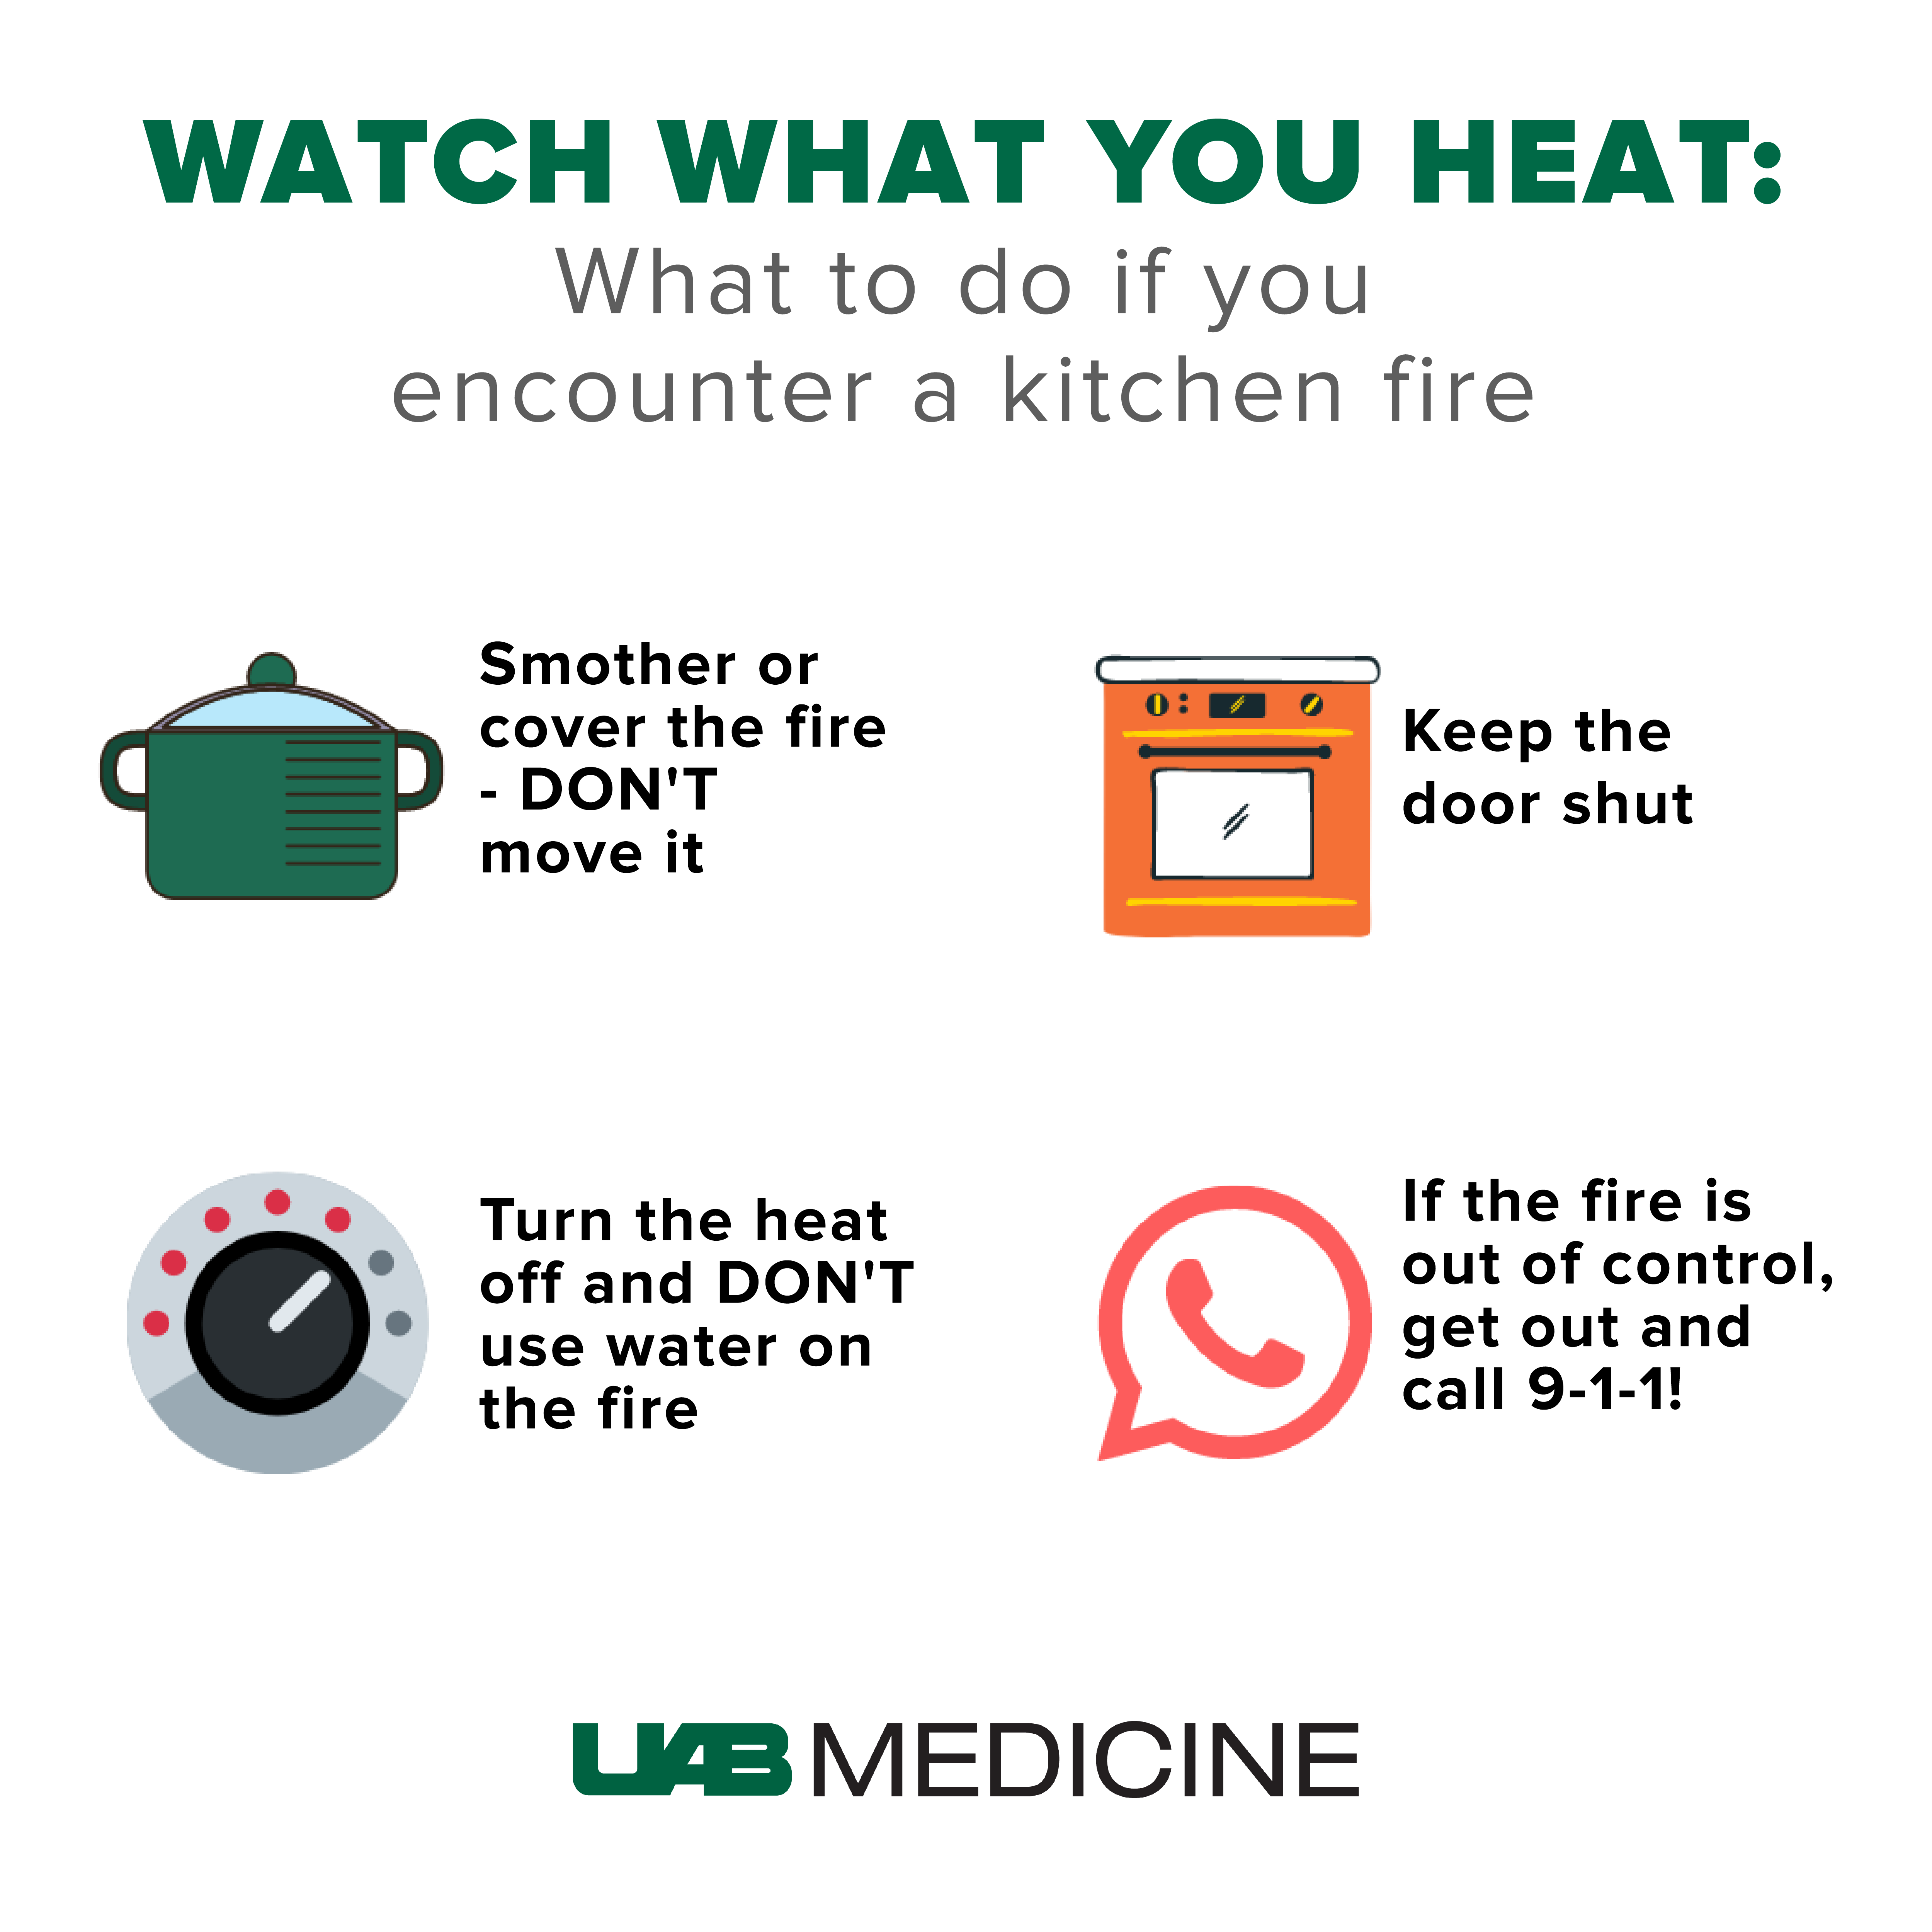 UAB Burn Center How to Handle a Kitchen Fire